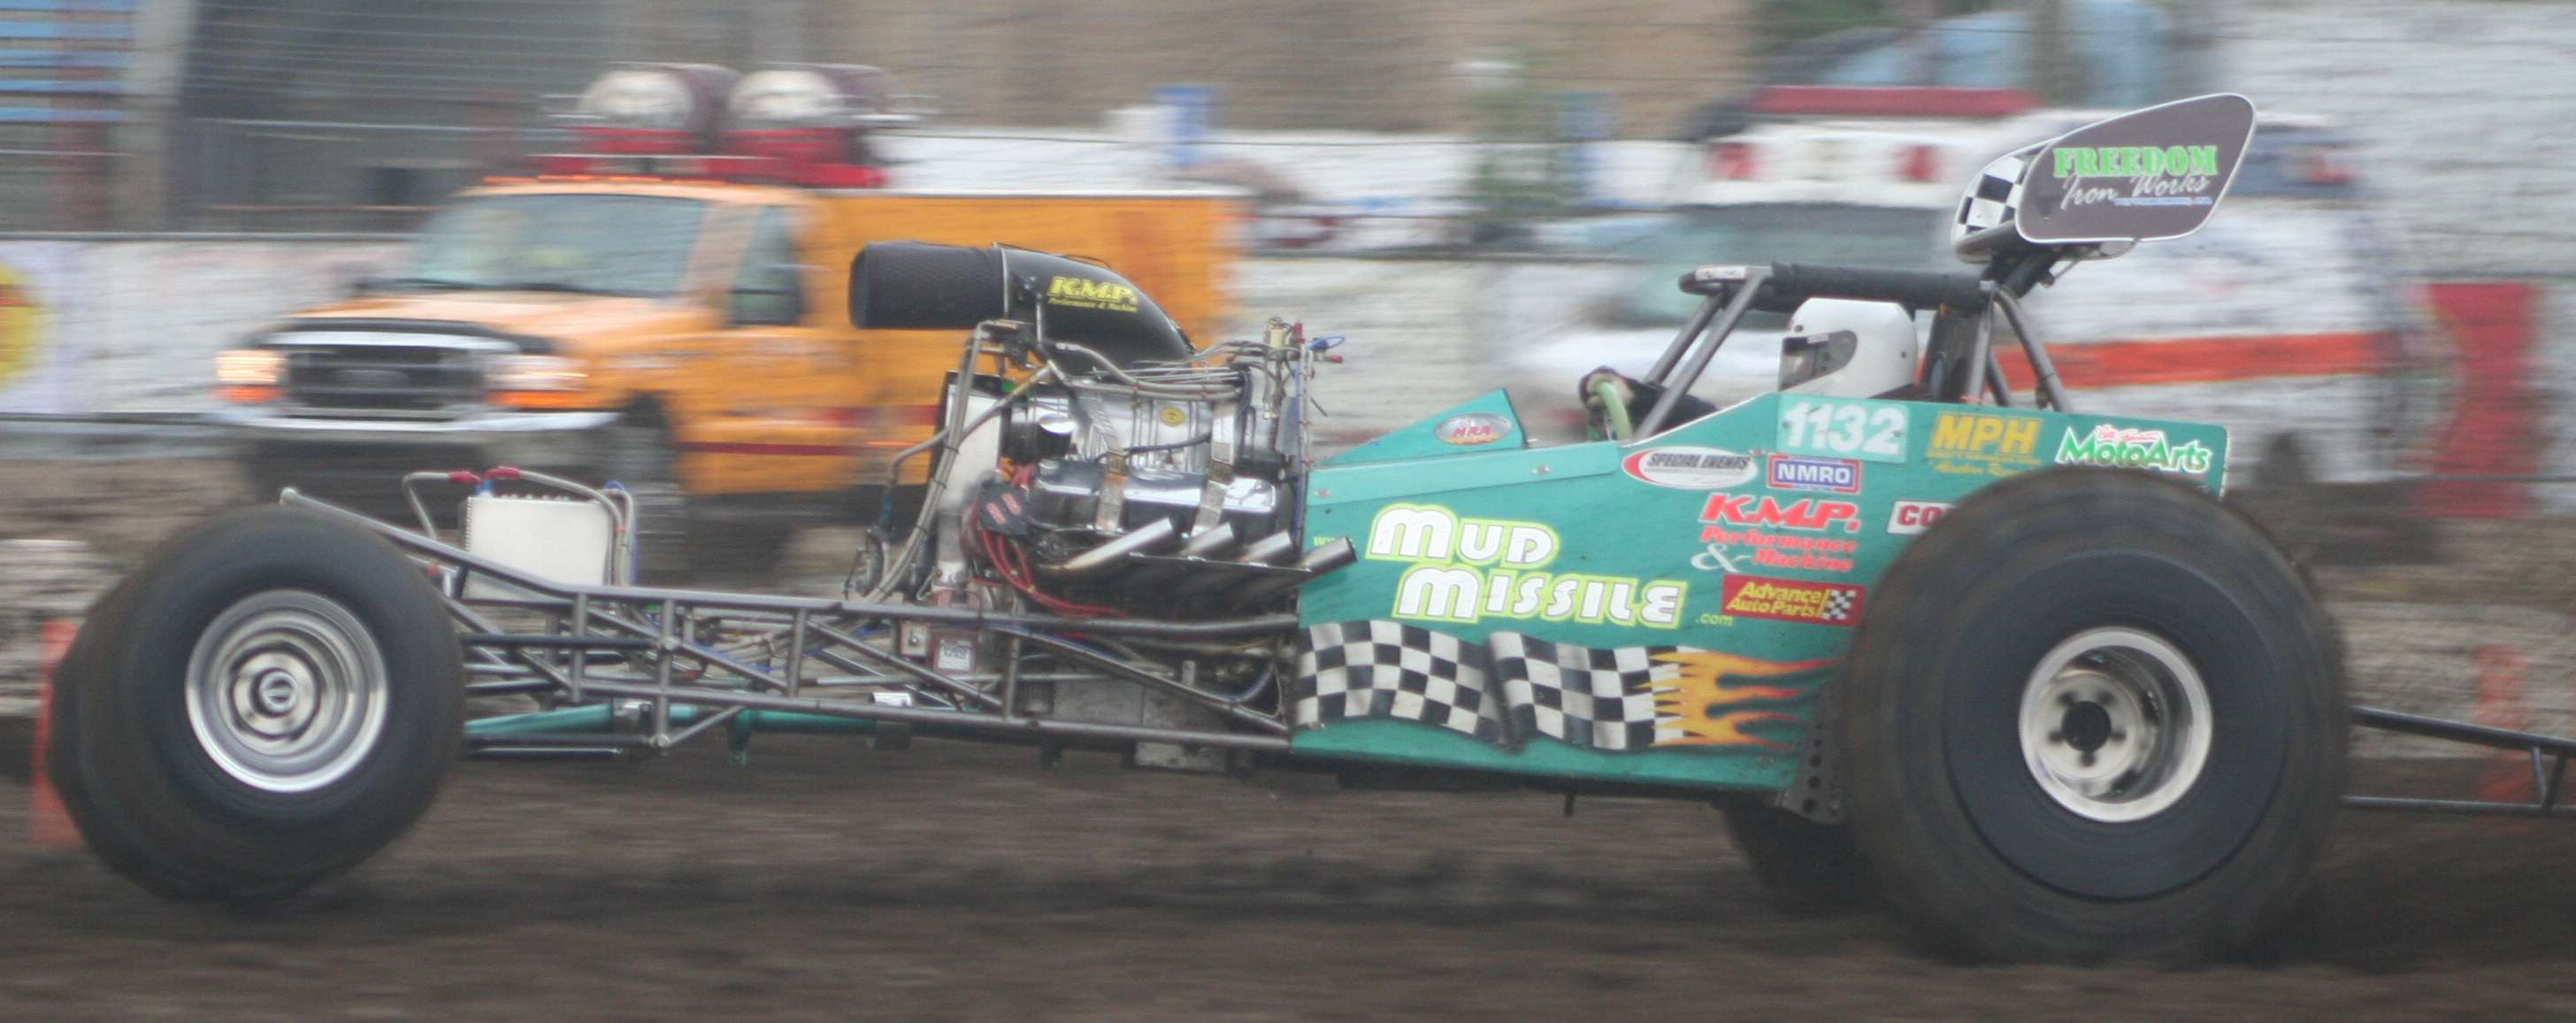 Mud Missile at Indy, 2008